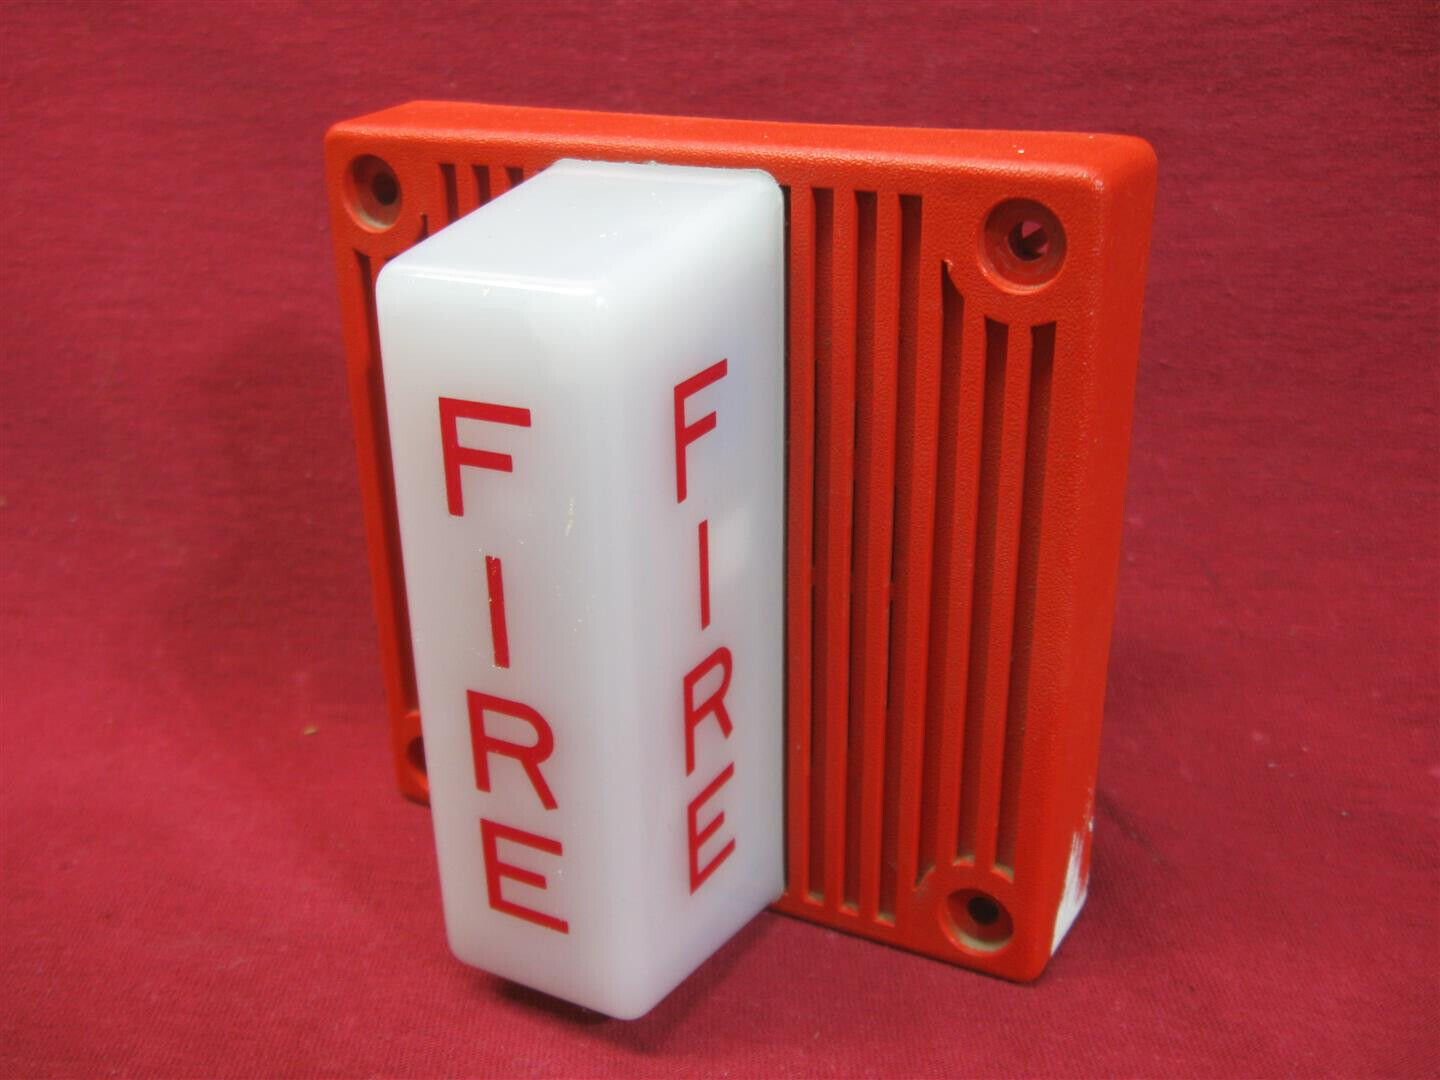 Vintage Radionics Fire Alarm Audible Strobe Untested #2 Offers Welcome